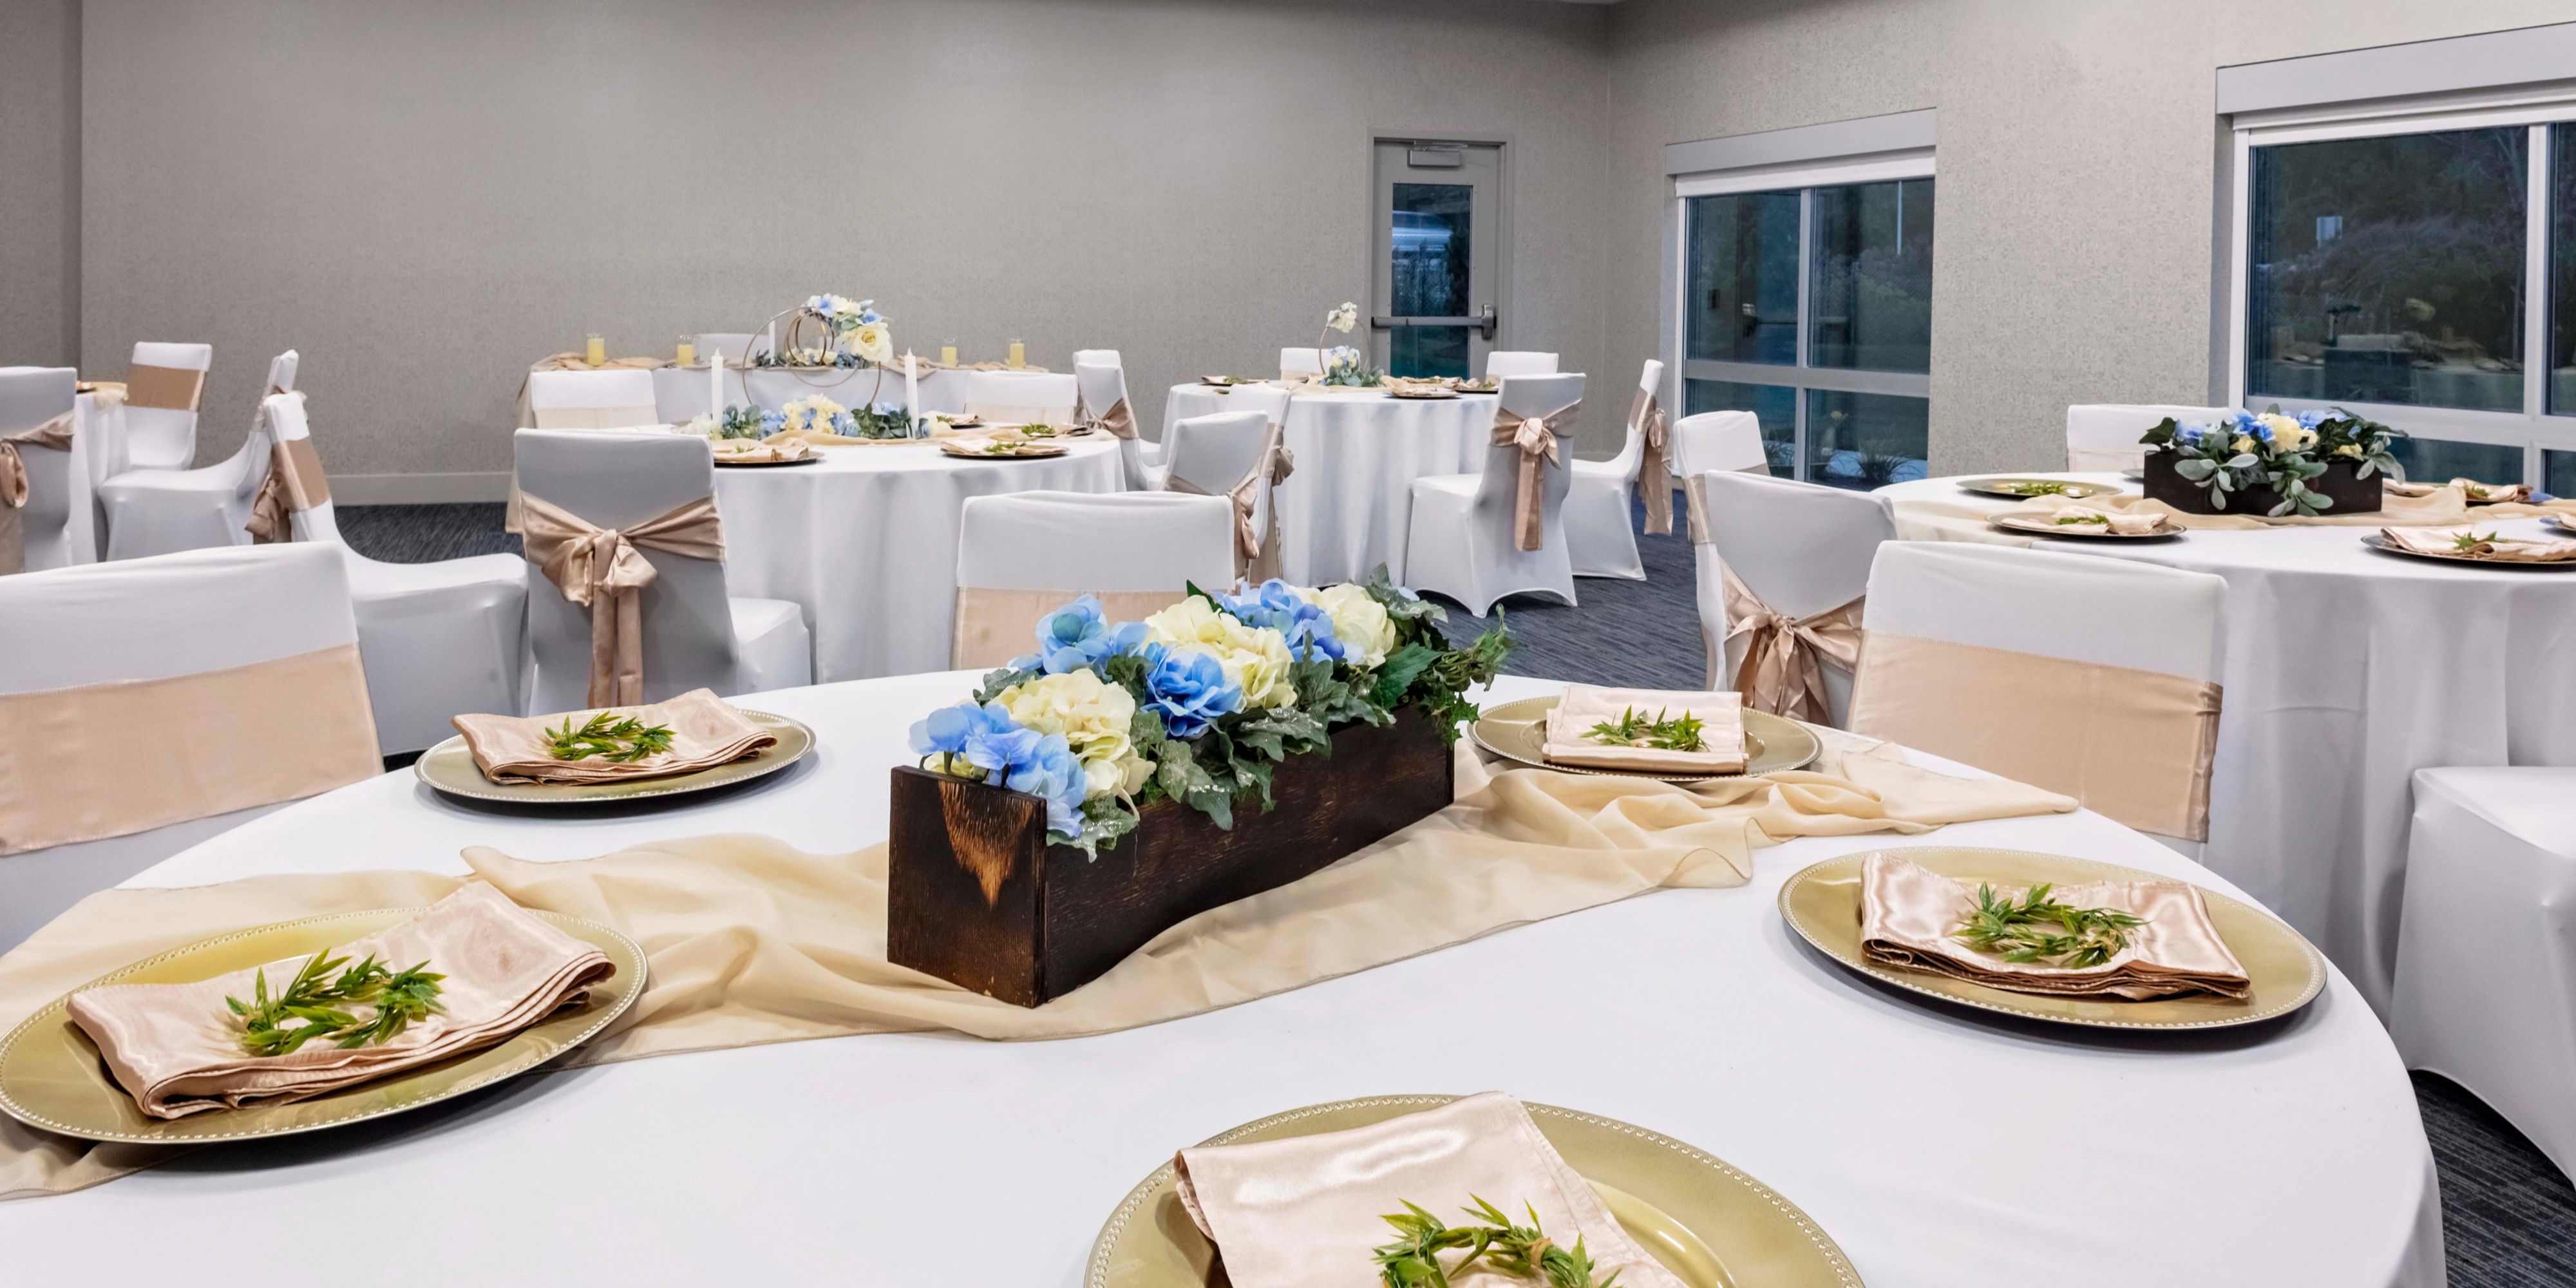 We proudly offer a 1200 sq ft meeting room that can accommodate up to 90 people. We offer catering service and liquor service for any event you may have in mind.